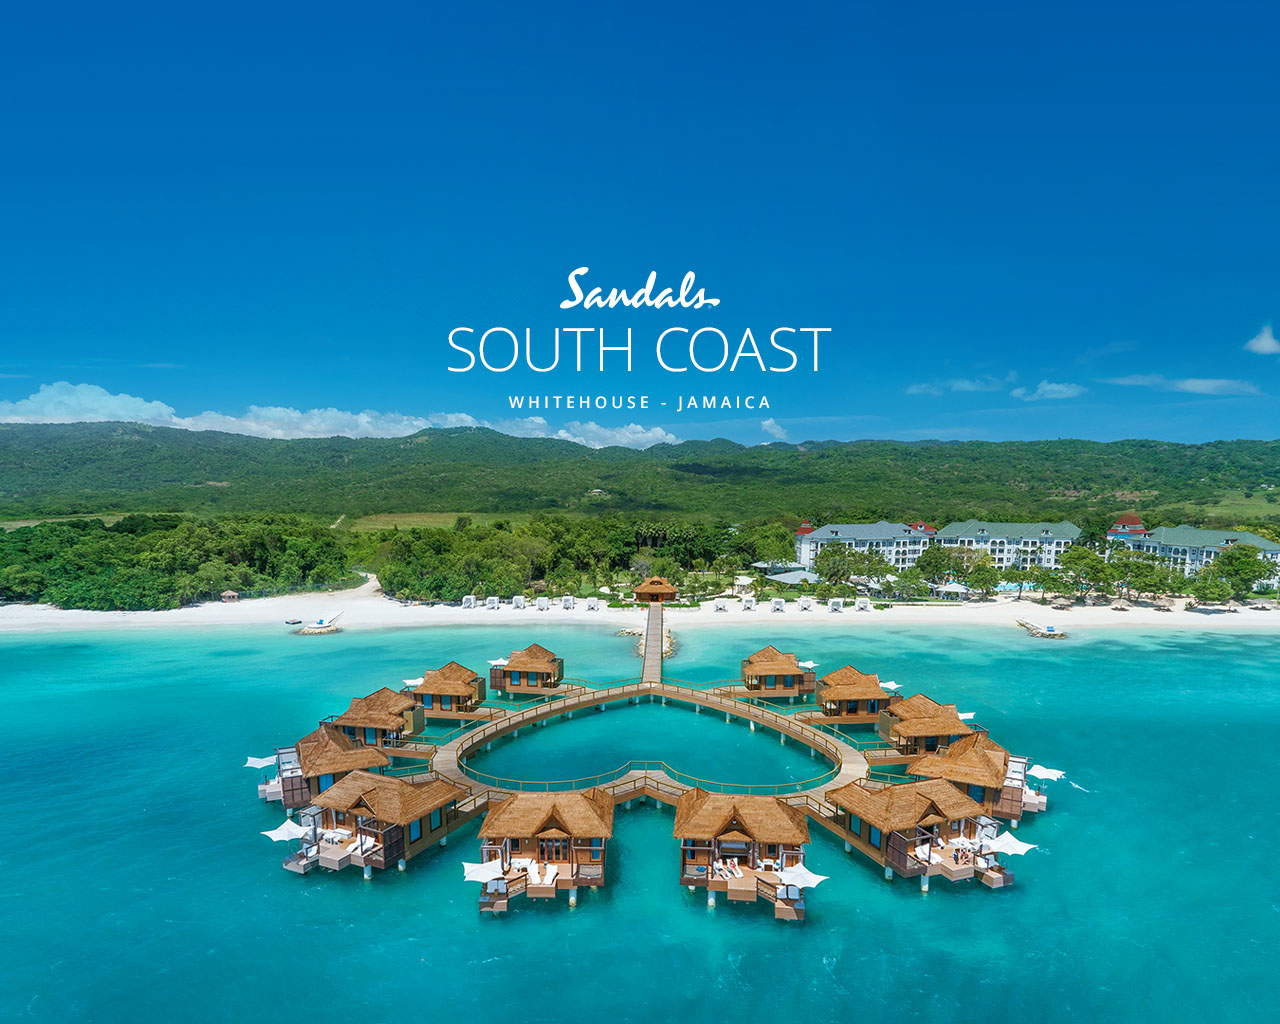 Sandals Royal Caribbean Resort Reviews: Over-the-Top Luxury